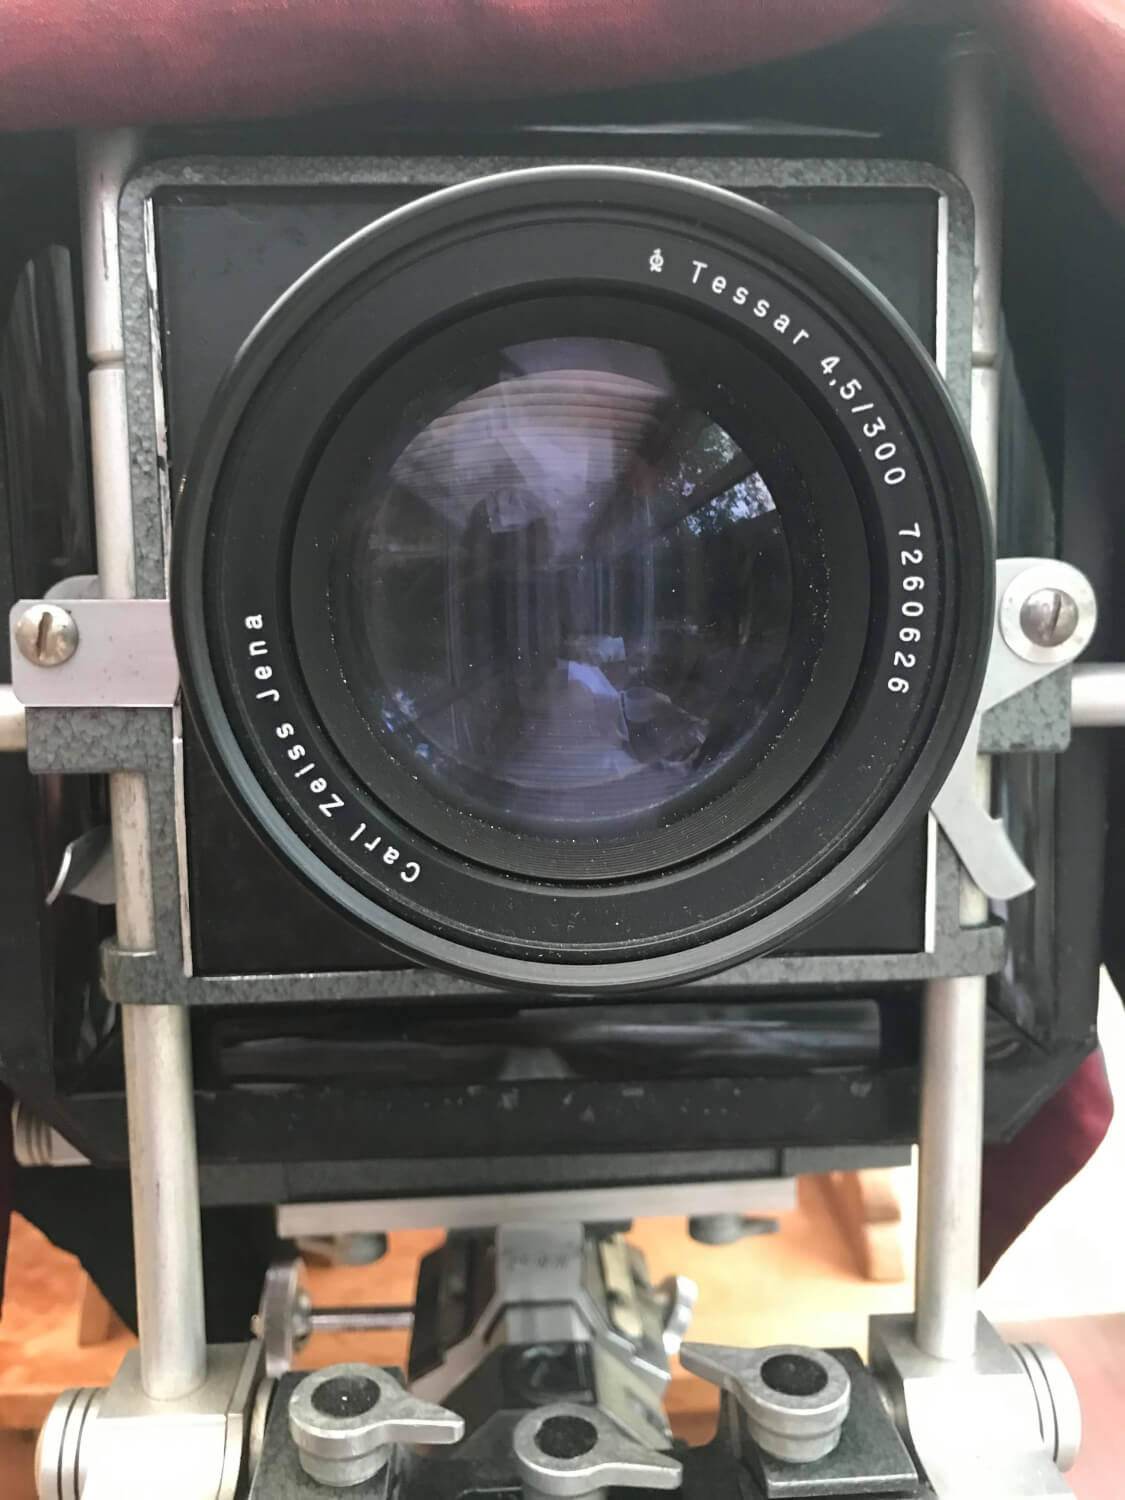 My go-to lens is a Carl Zeiss Jena Tessar 4.5:300 shown here mounted on my Devere